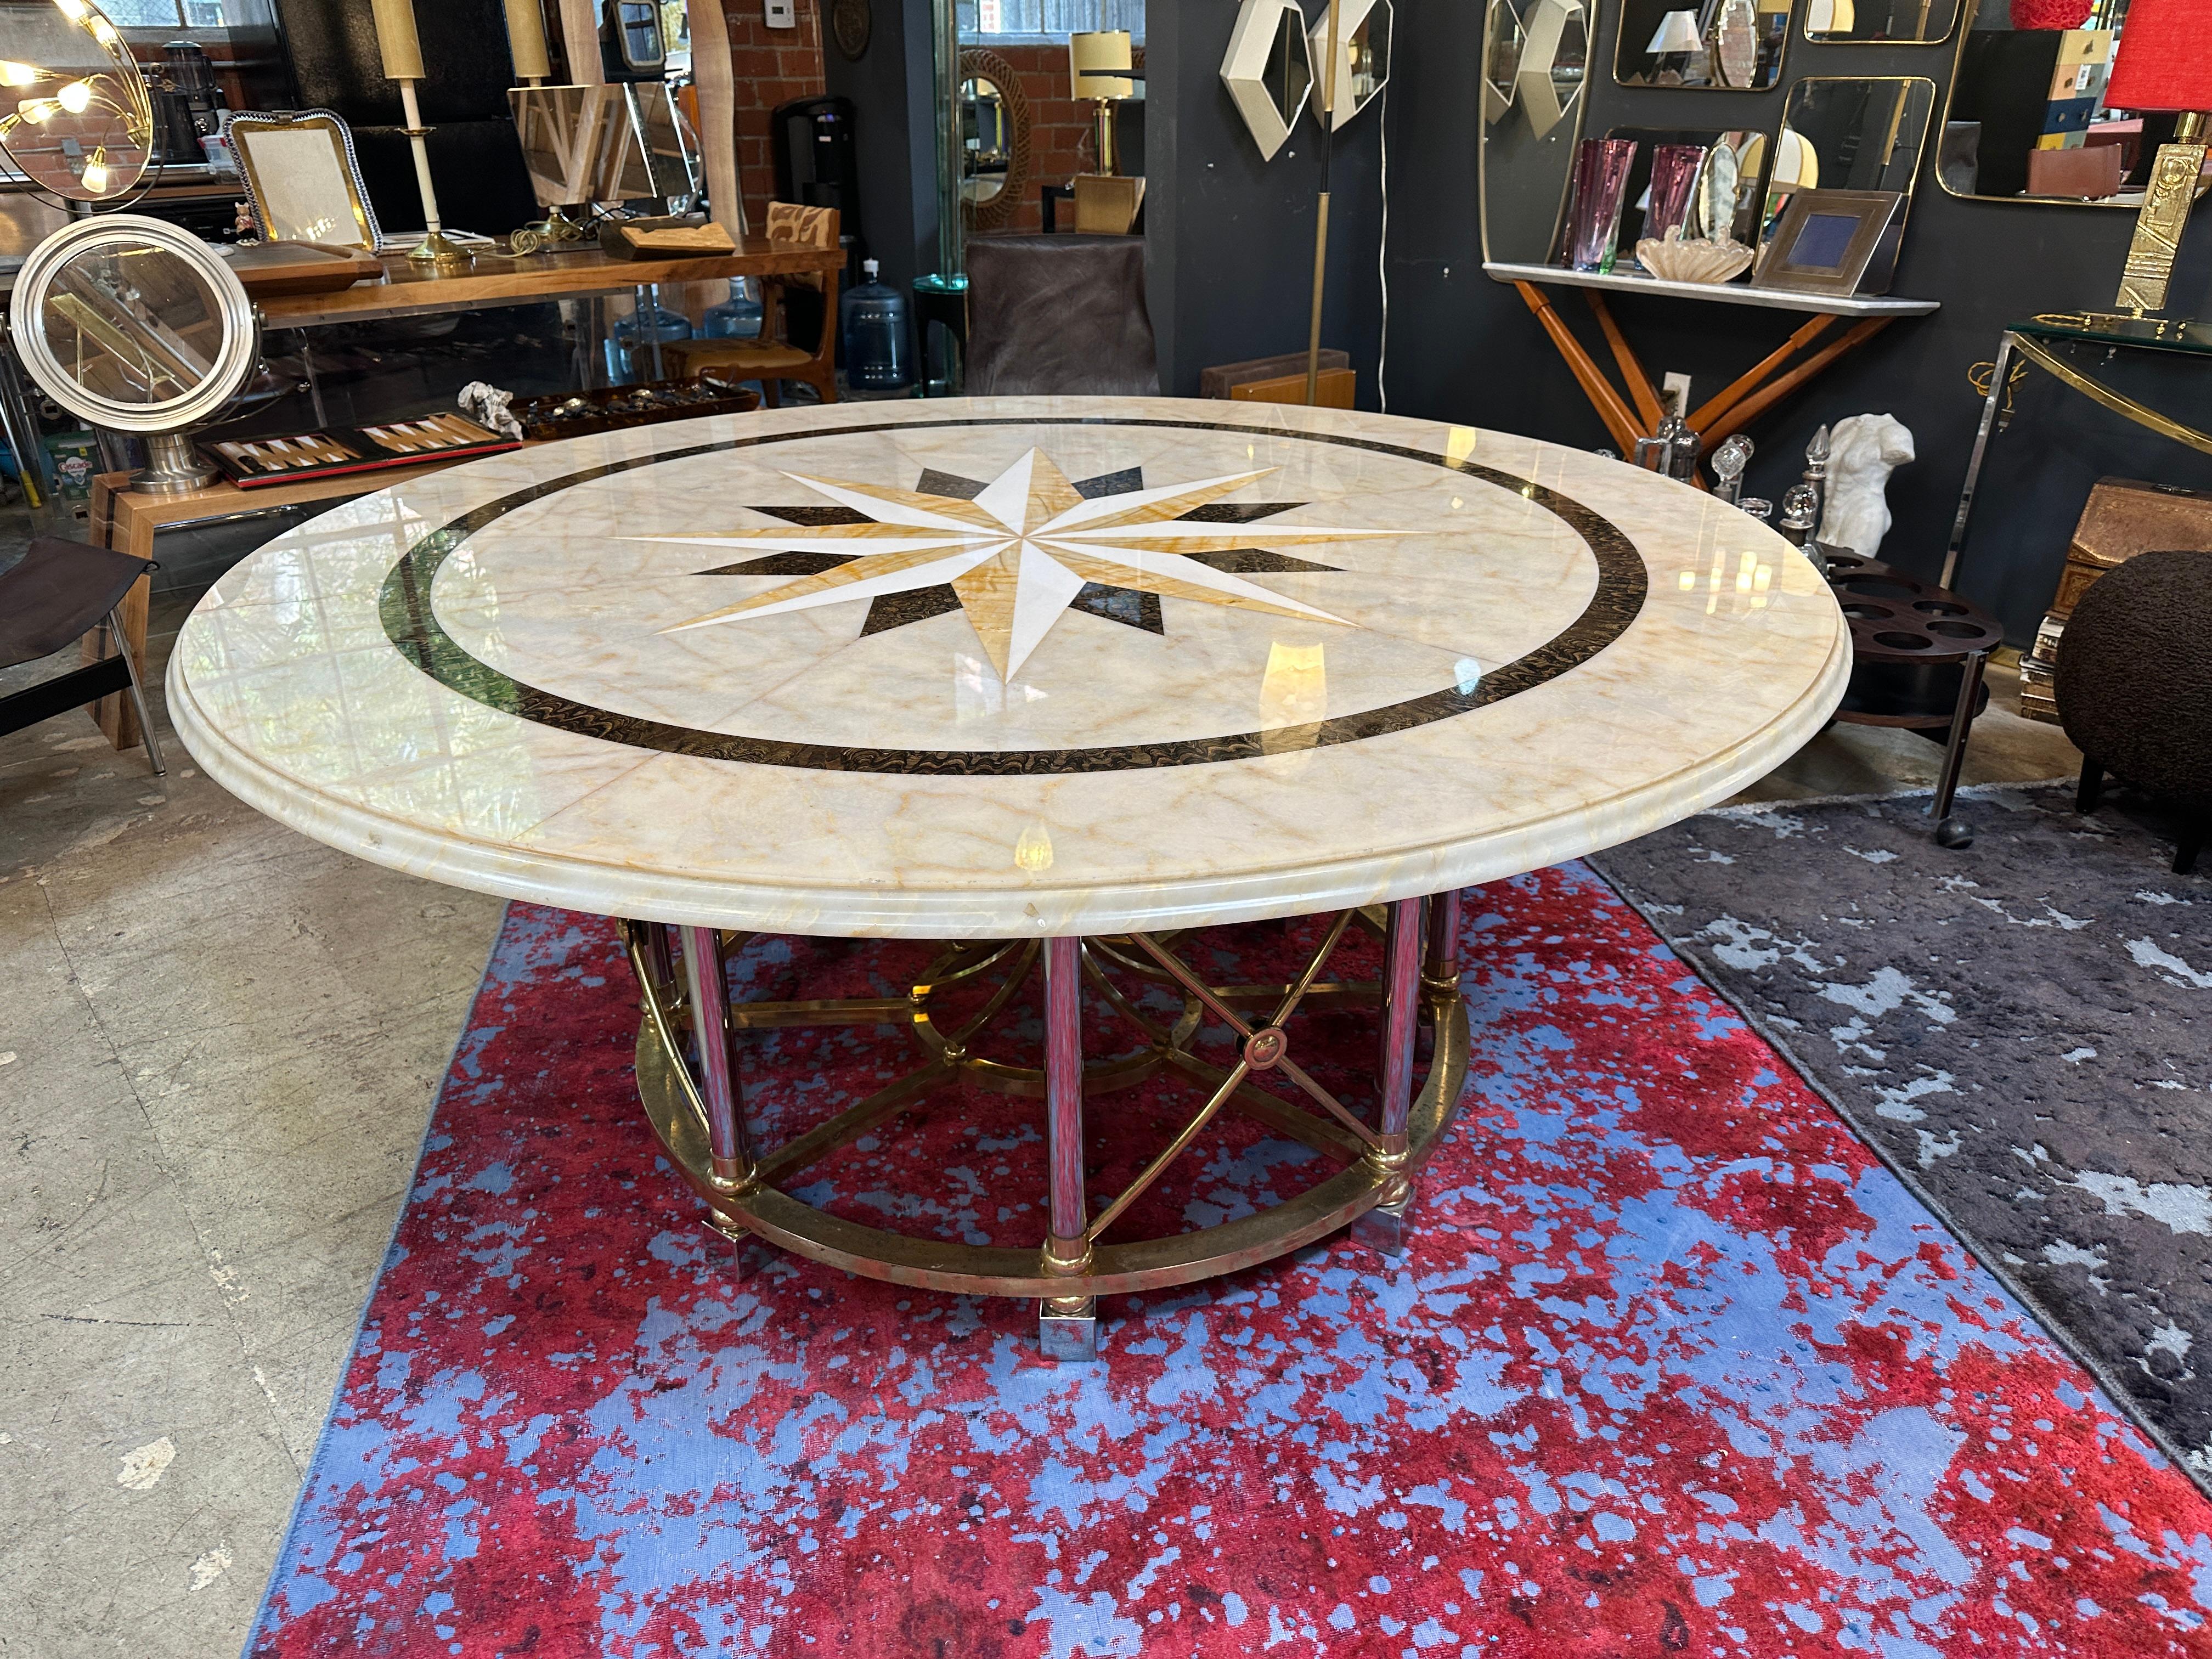 This oversize round marble table is a beautiful example of Italian design from the 1960s. It features a large, 1960s-era style round marble tabletop, which provides ample space for dining or gathering. The use of marble adds a luxurious and elegant